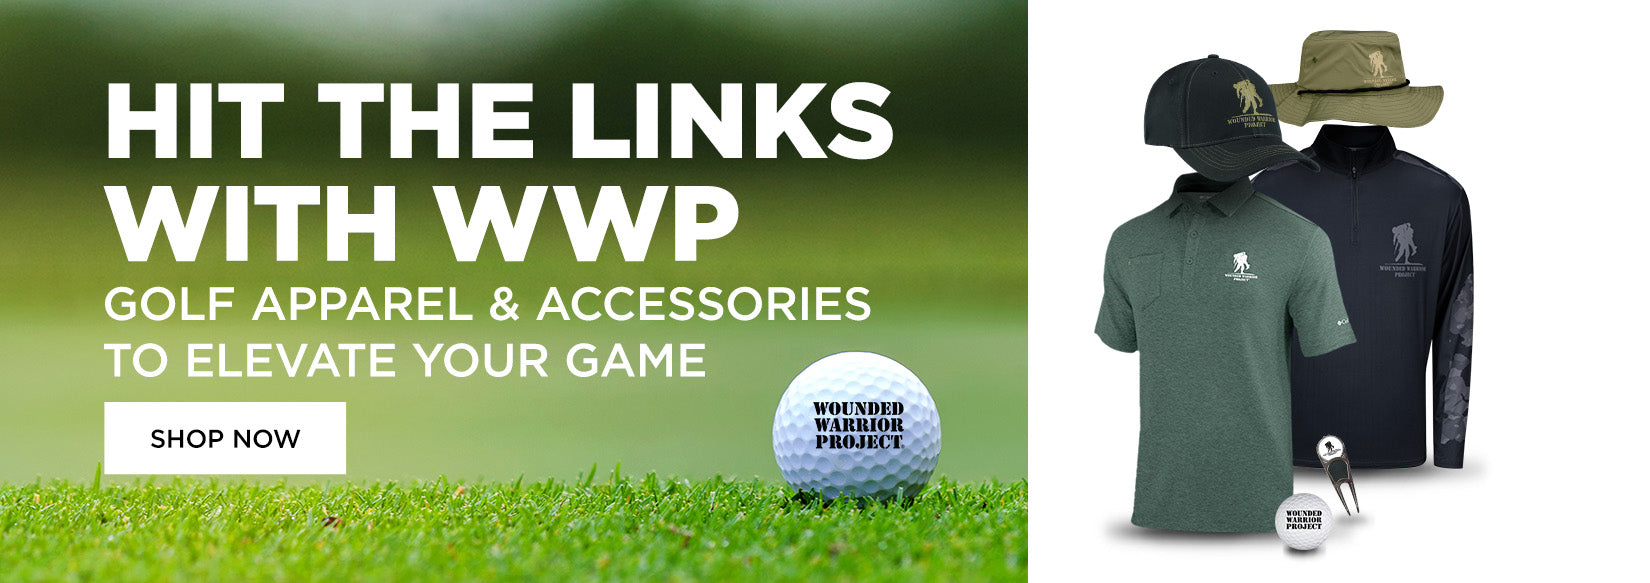 Hit the Links with WWP - Golf Apparel and Accessories to Elevate Your Game - SHOP NOW